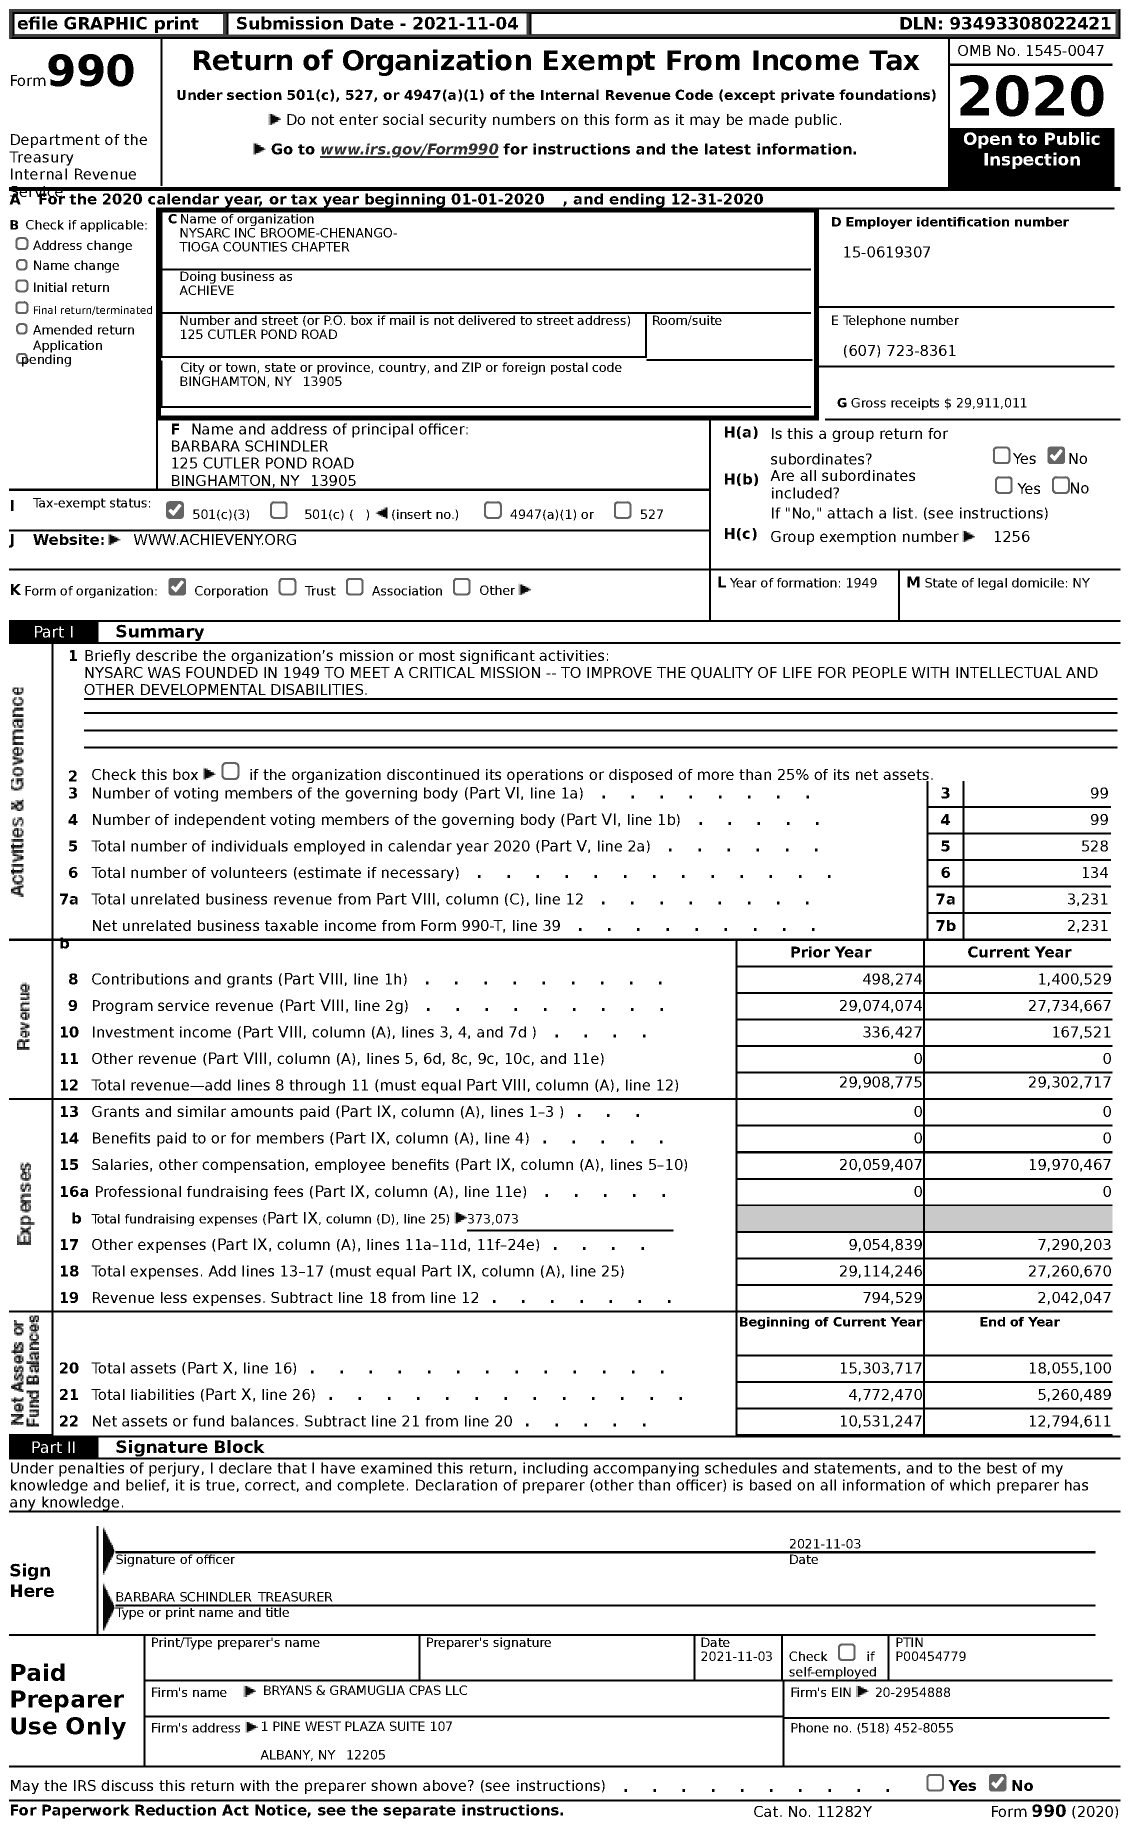 Image of first page of 2020 Form 990 for Achieve / Nysarc Inc Broome-Chenango- Tioga Counties Chapter